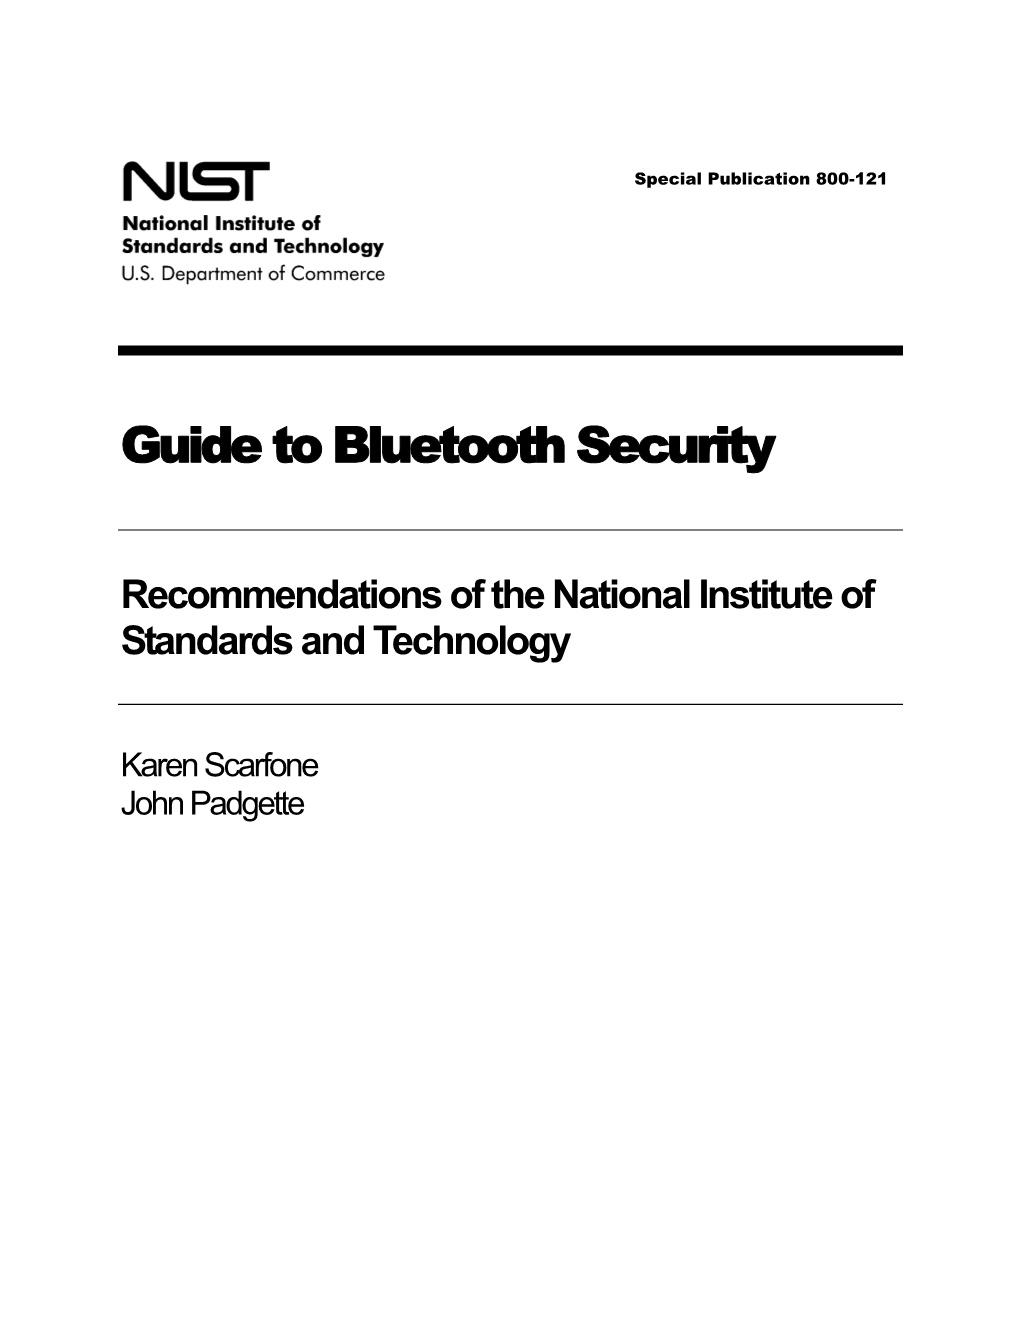 NIST SP 200-121, Guide to Bluetooth Security